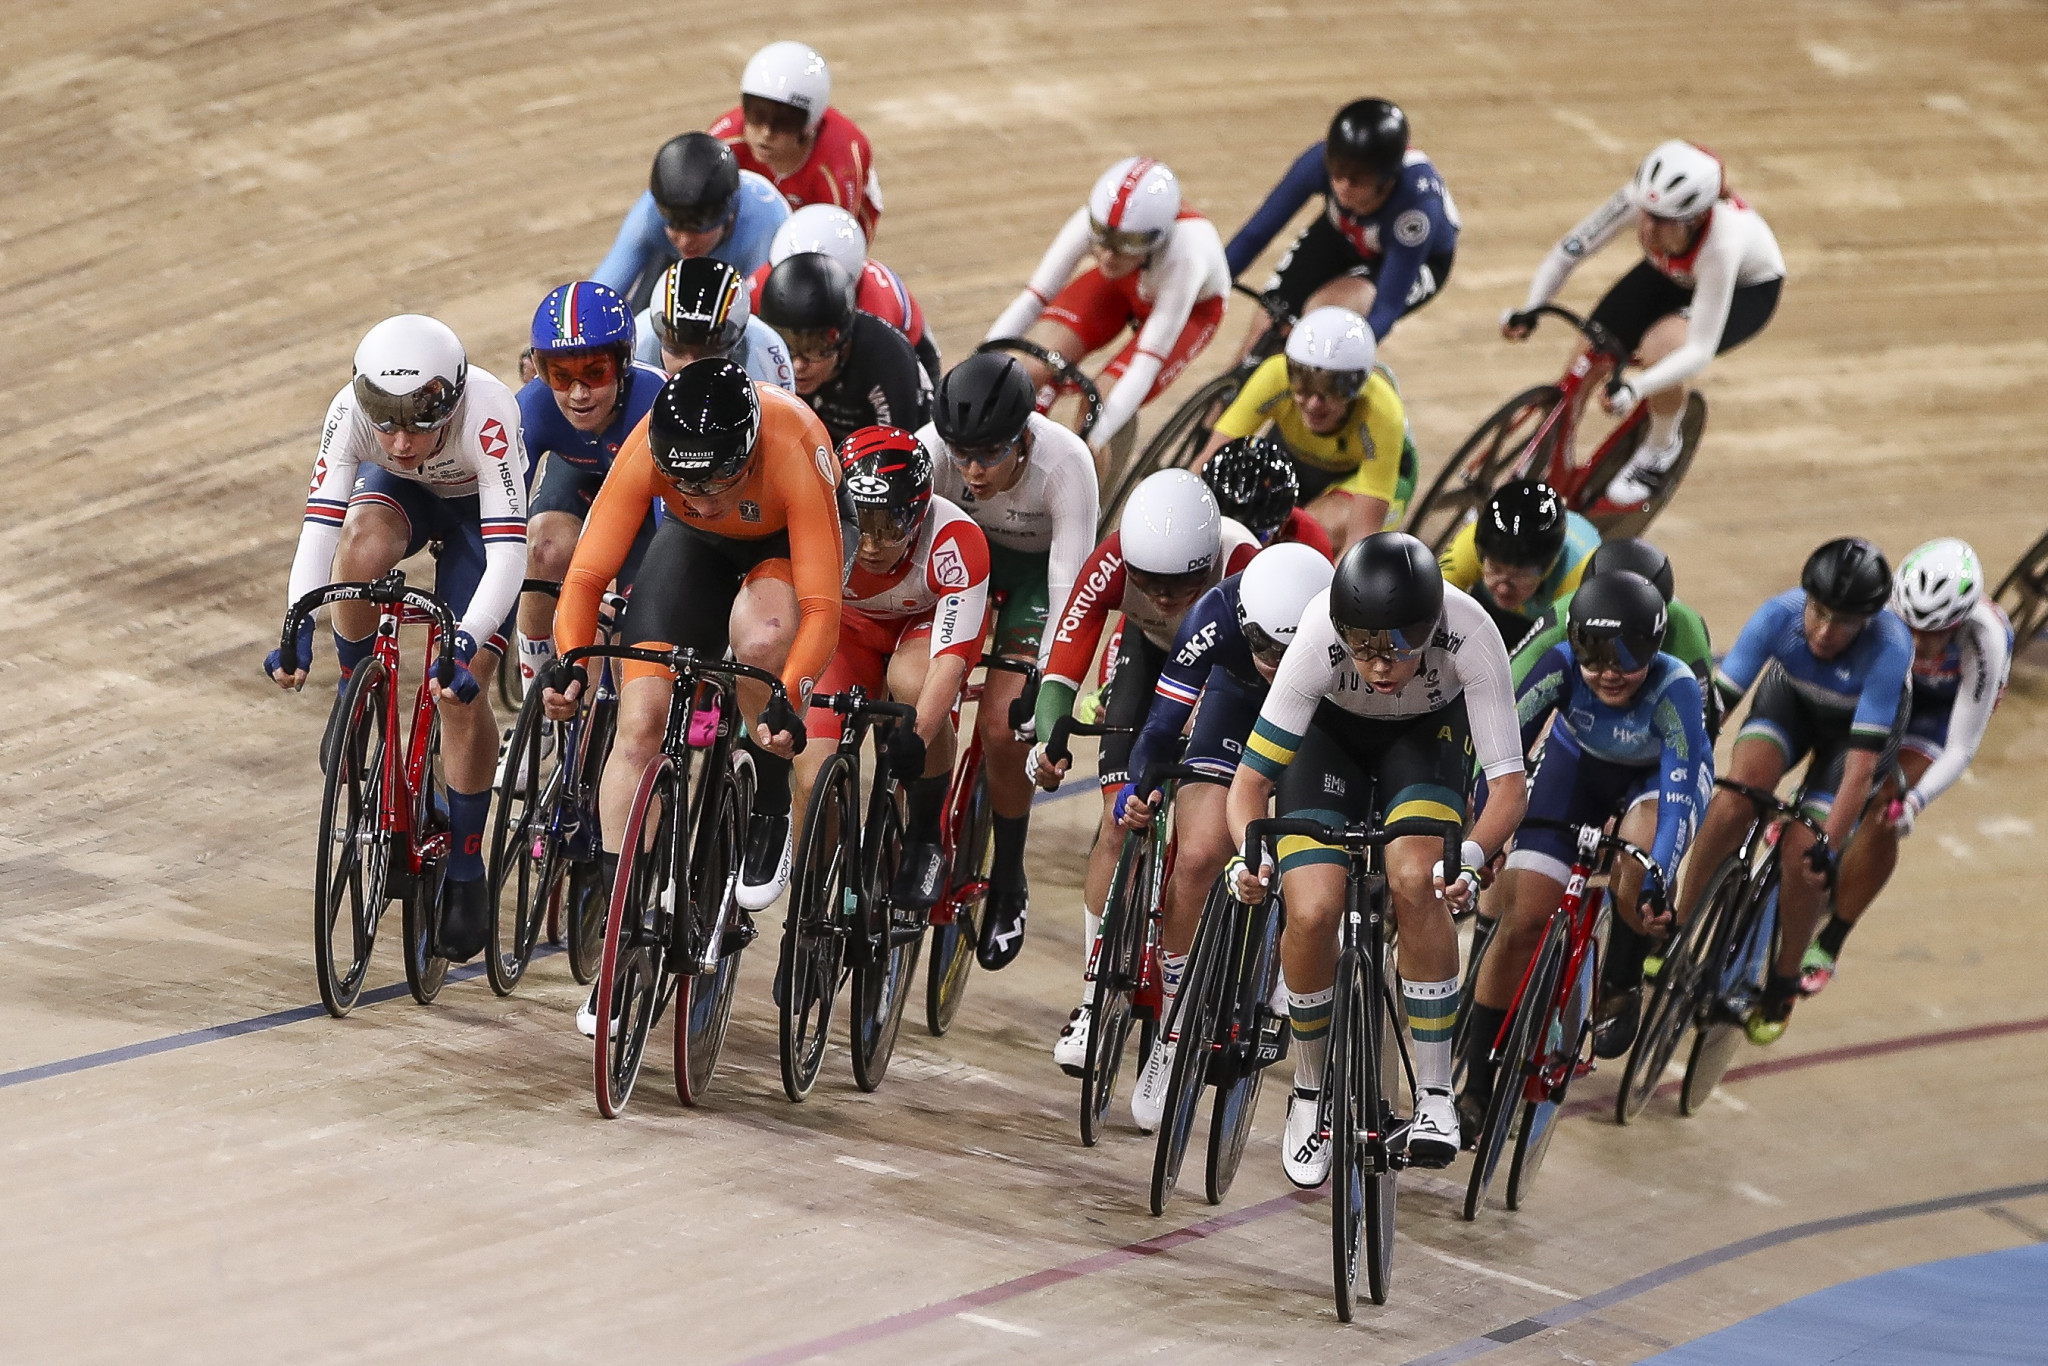 British Cycling said it had been informed by the International Cycling Union that Emily Bridges cannot participate in the women's event at the British National Omnium Championships ©Getty Images